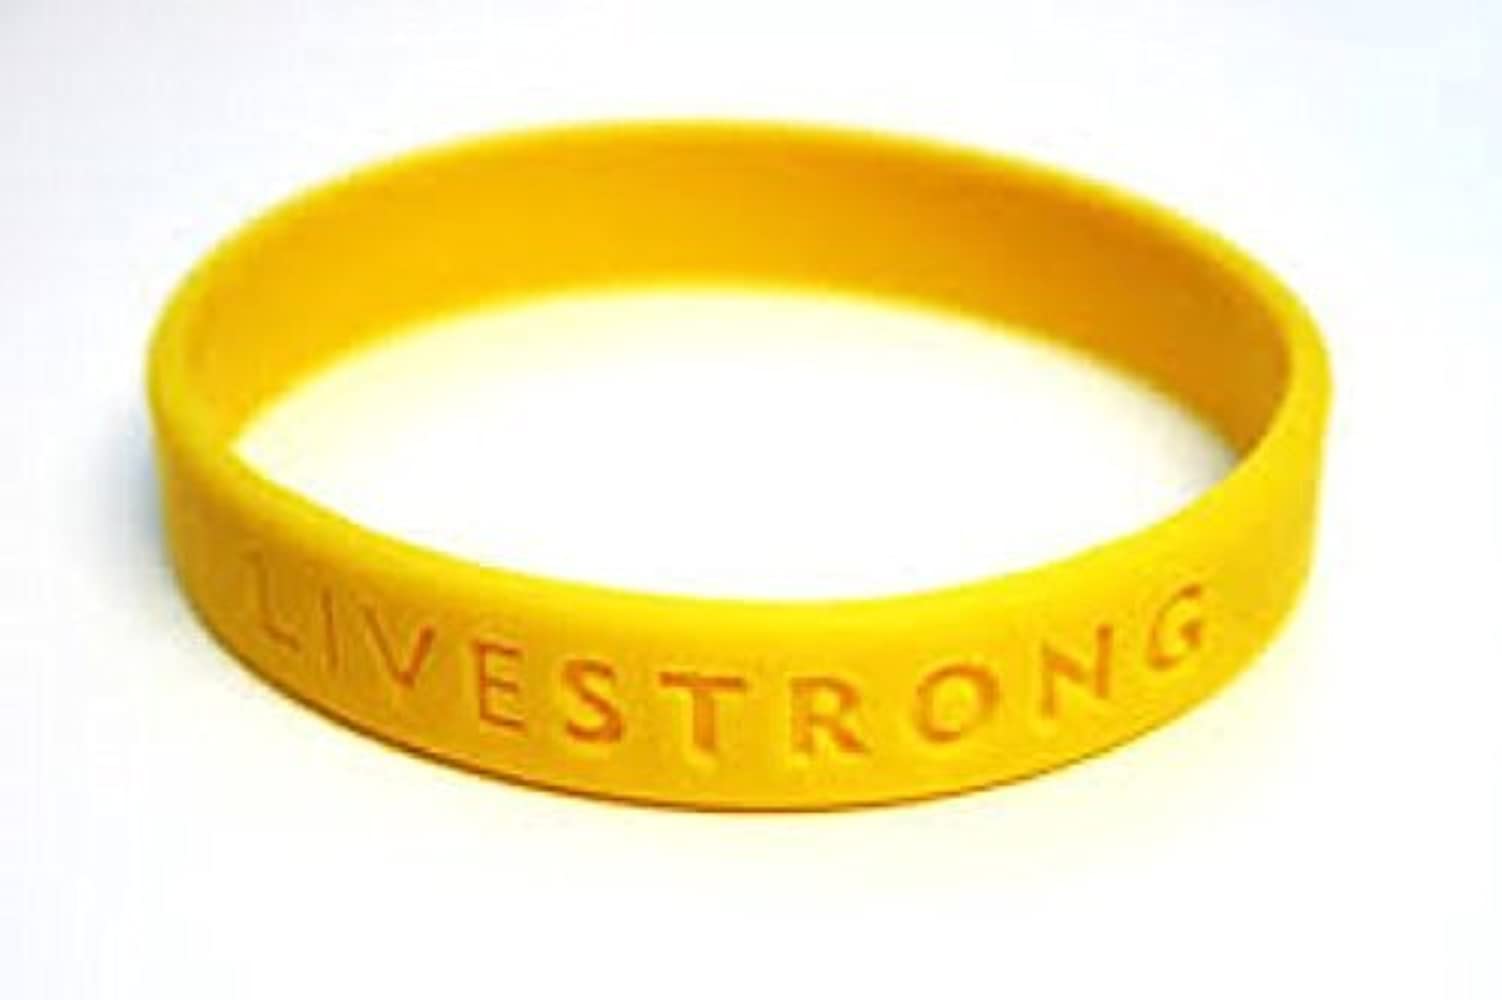 livestrong bracelet memoryfox storytelling interview questions